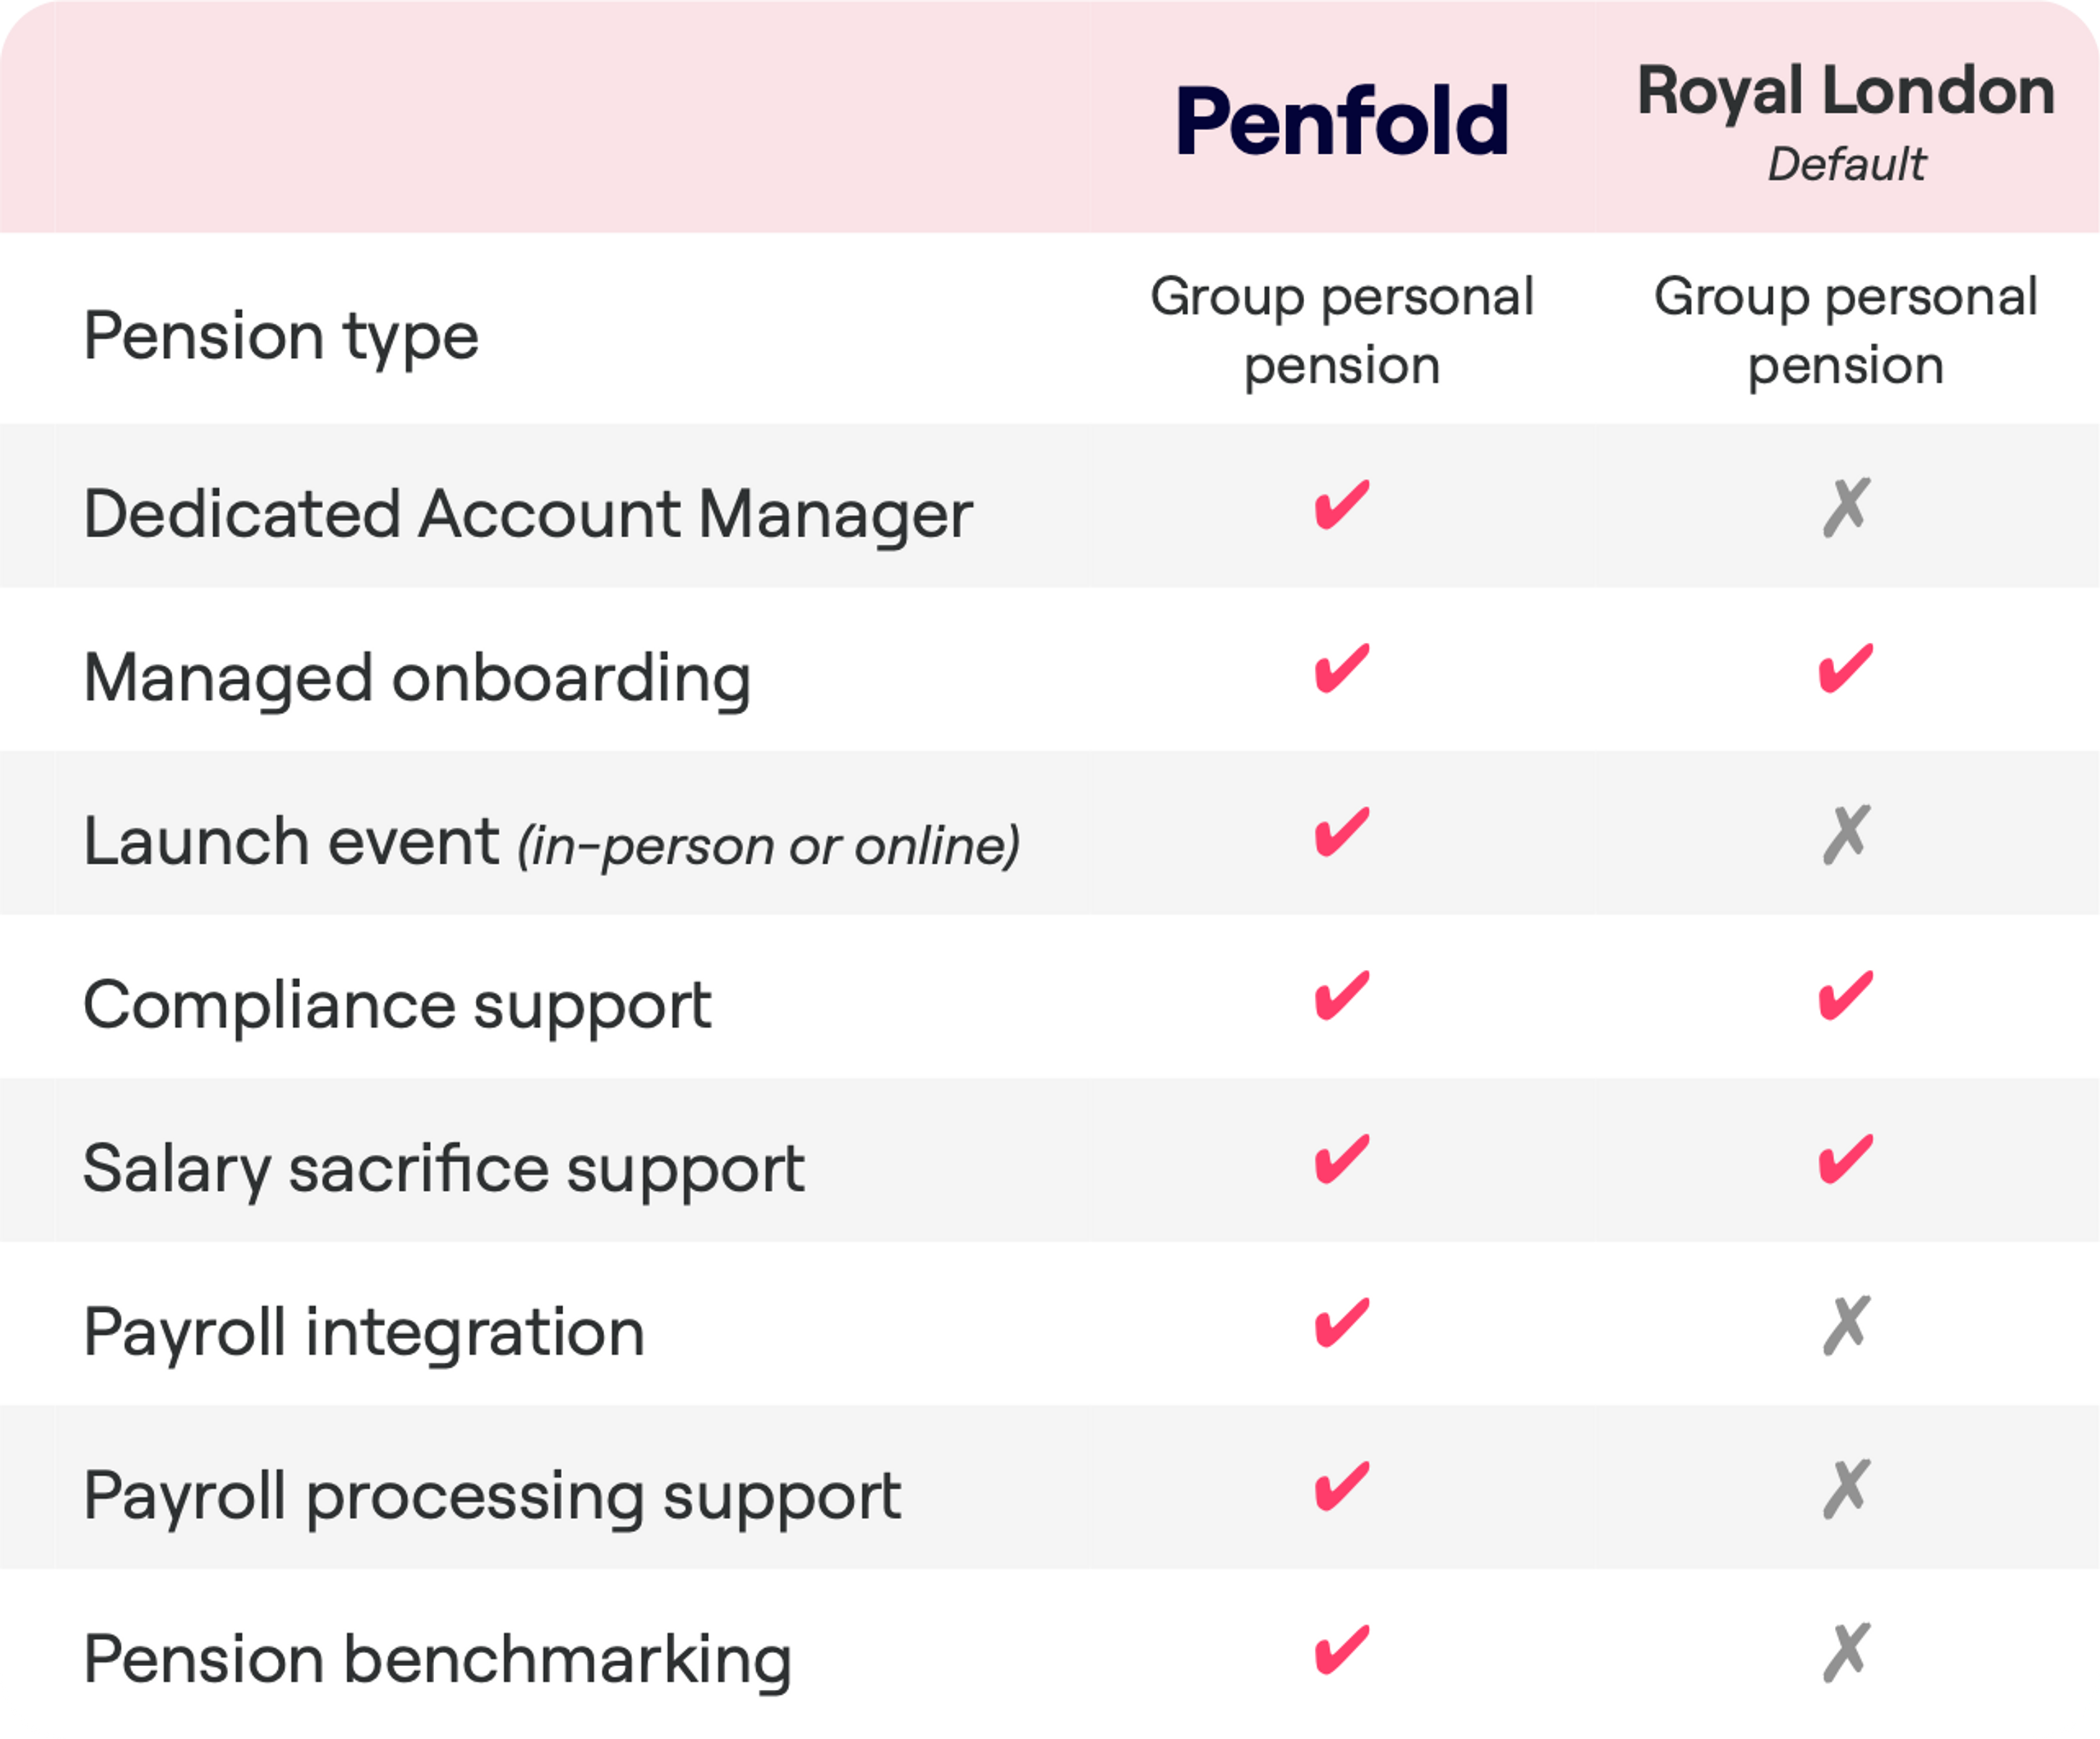 A comparison table between Penfold and Royal London Default pension services, both categorized as Group personal pensions. The table compares features such as Dedicated Account Manager, Managed onboarding, Launch event, Compliance support, Salary sacrifice support, Payroll integration, Payroll processing support, and Pension benchmarking. Penfold offers all the services. Royal London provides Managed onboarding, Compliance support, and Salary sacrifice support but does not offer the other services.